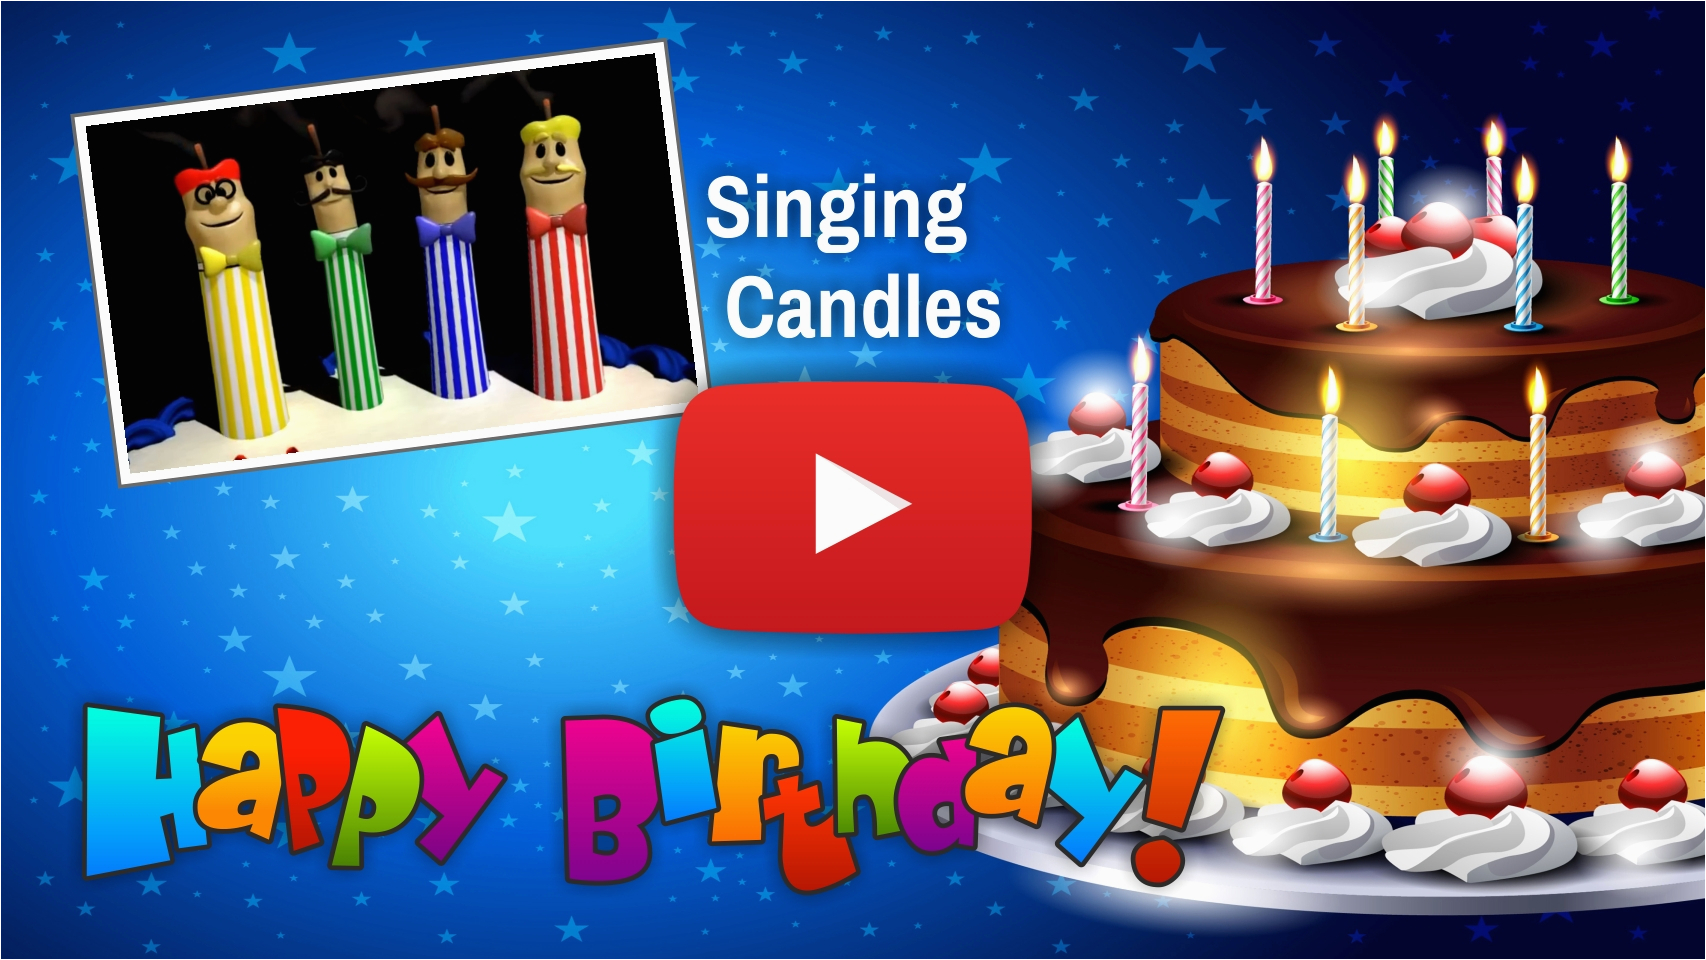 birthday video card inspirational cake candles singing the happy birthday song video happy